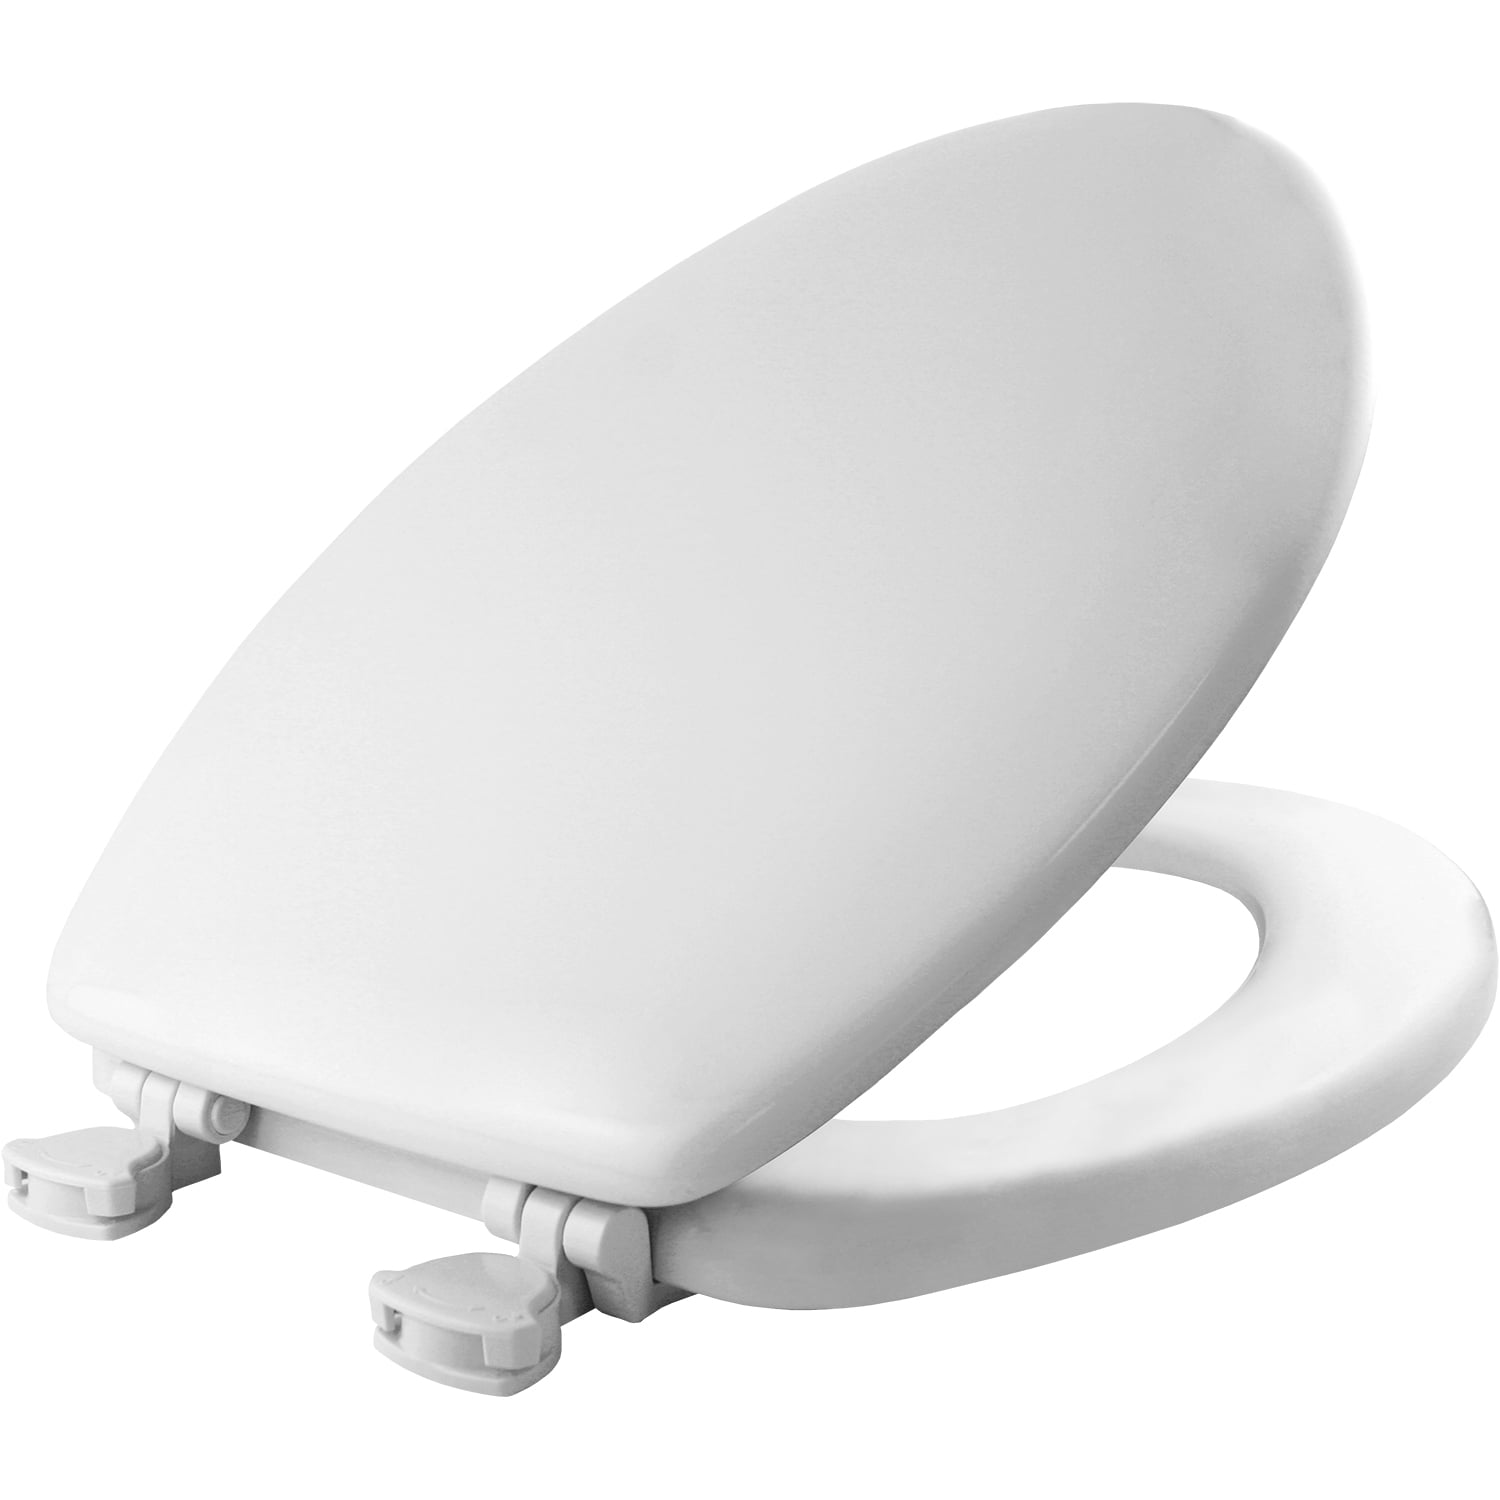 MAYFAIR  13EC 000 Soft Toilet Seat Easily Removes ROUND Padded with Wood Core, 